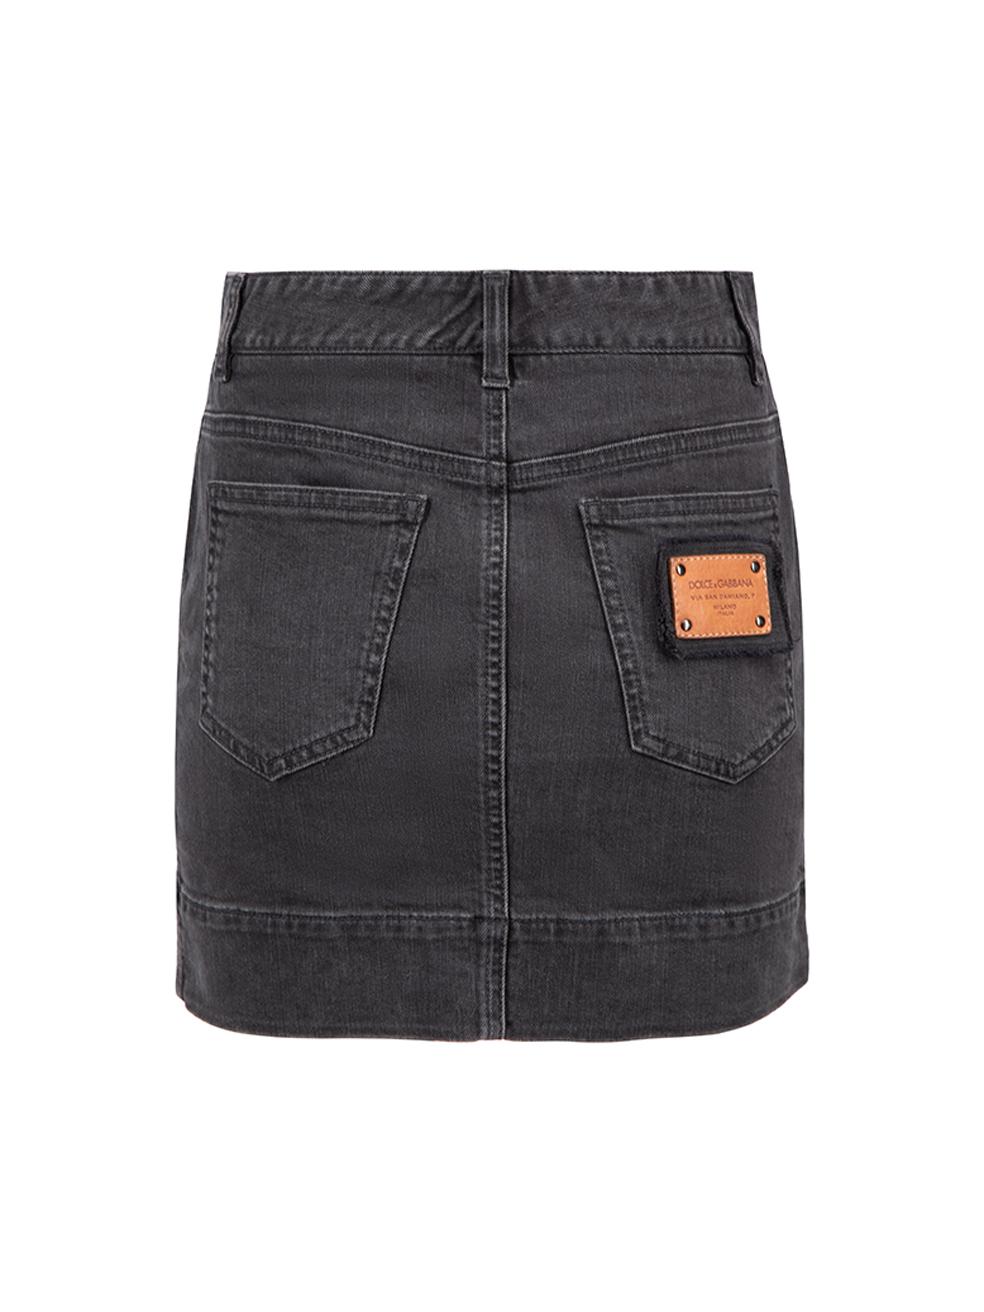 Dolce & Gabbana Black Denim Mini Skirt Size XS In Excellent Condition For Sale In London, GB